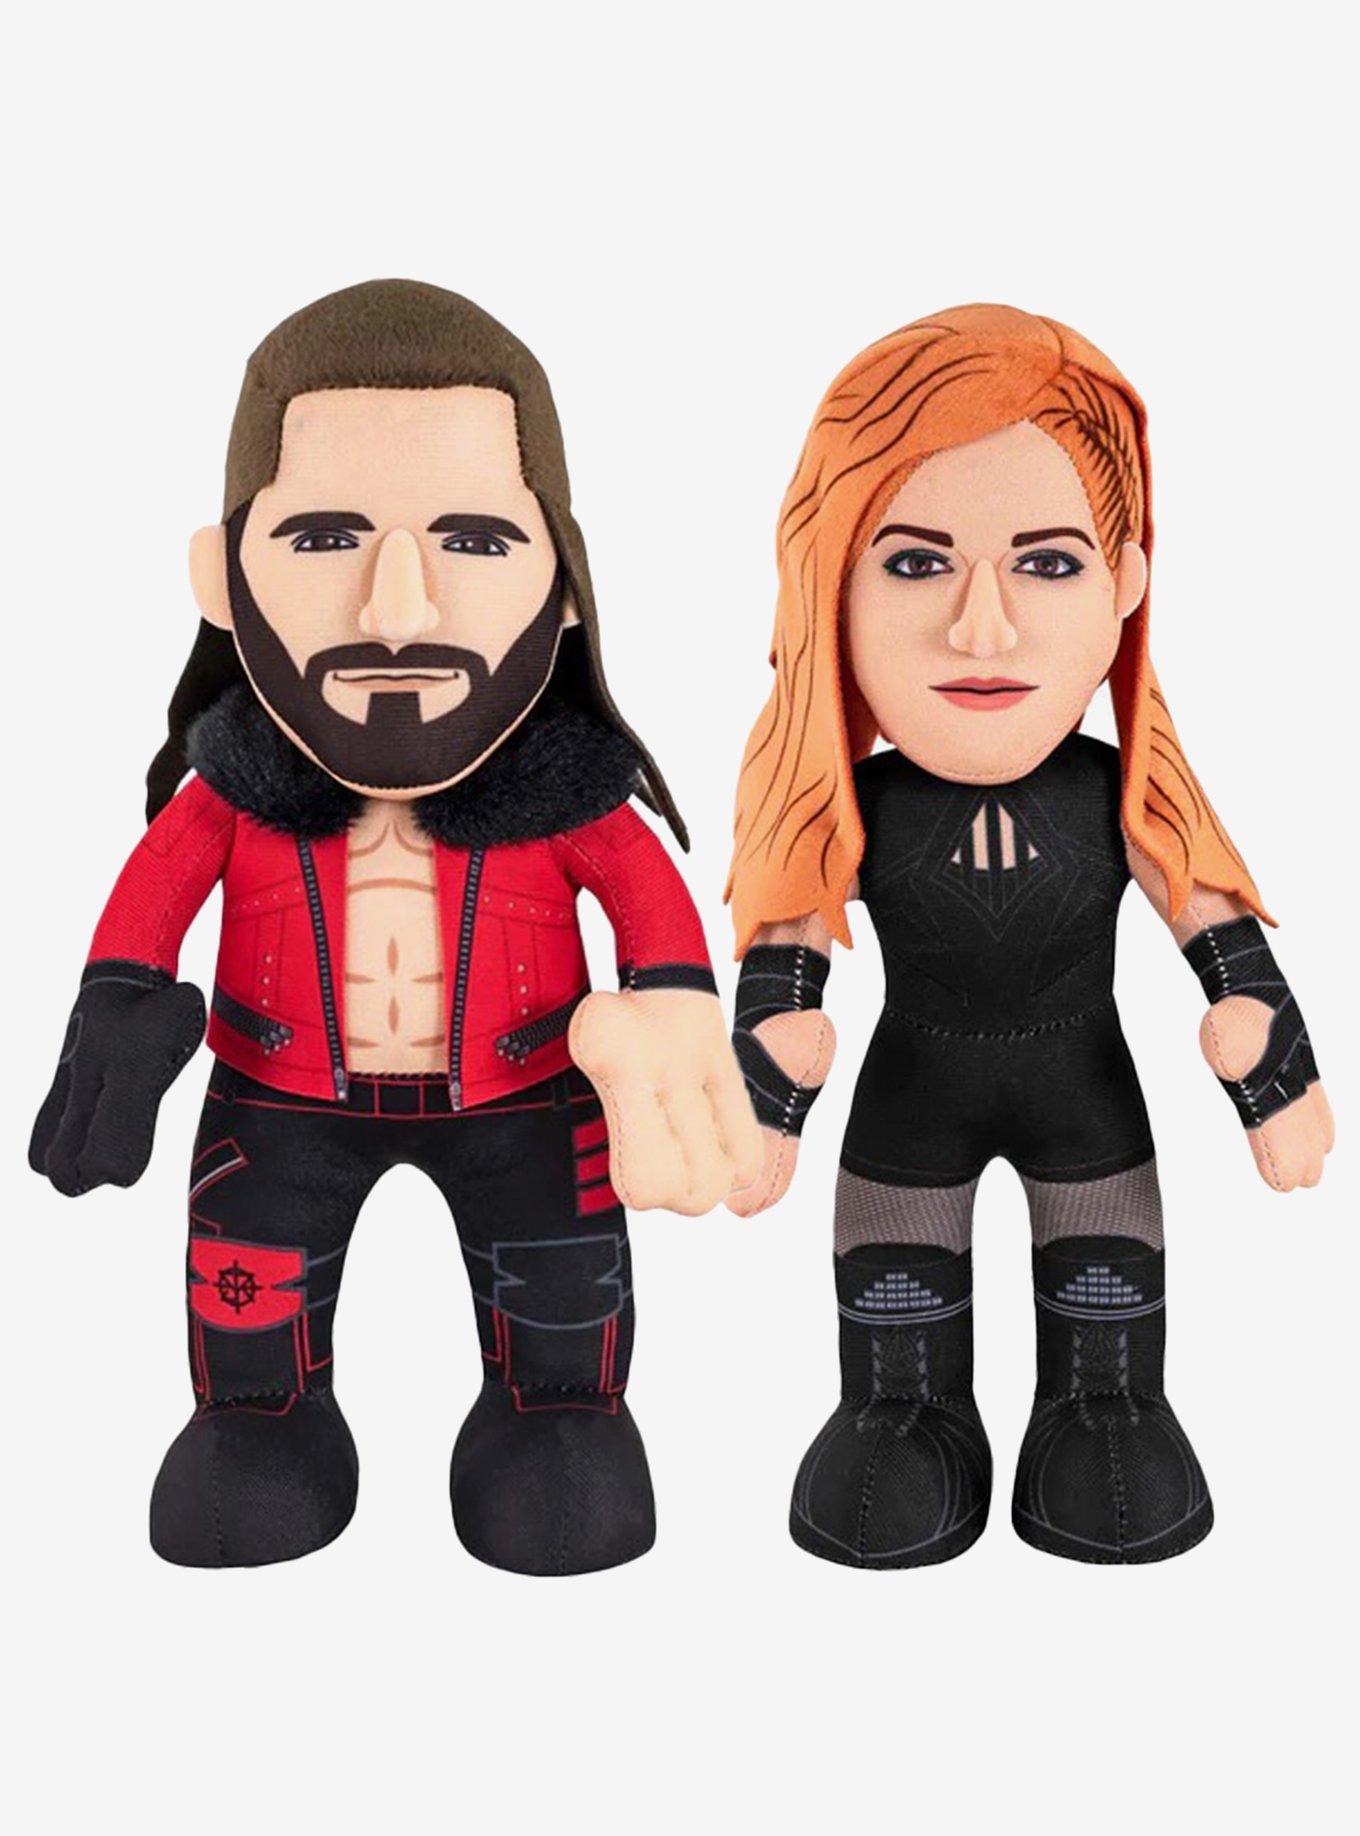 Seth Rollins On Working With Becky Lynch On-Screen In WWE